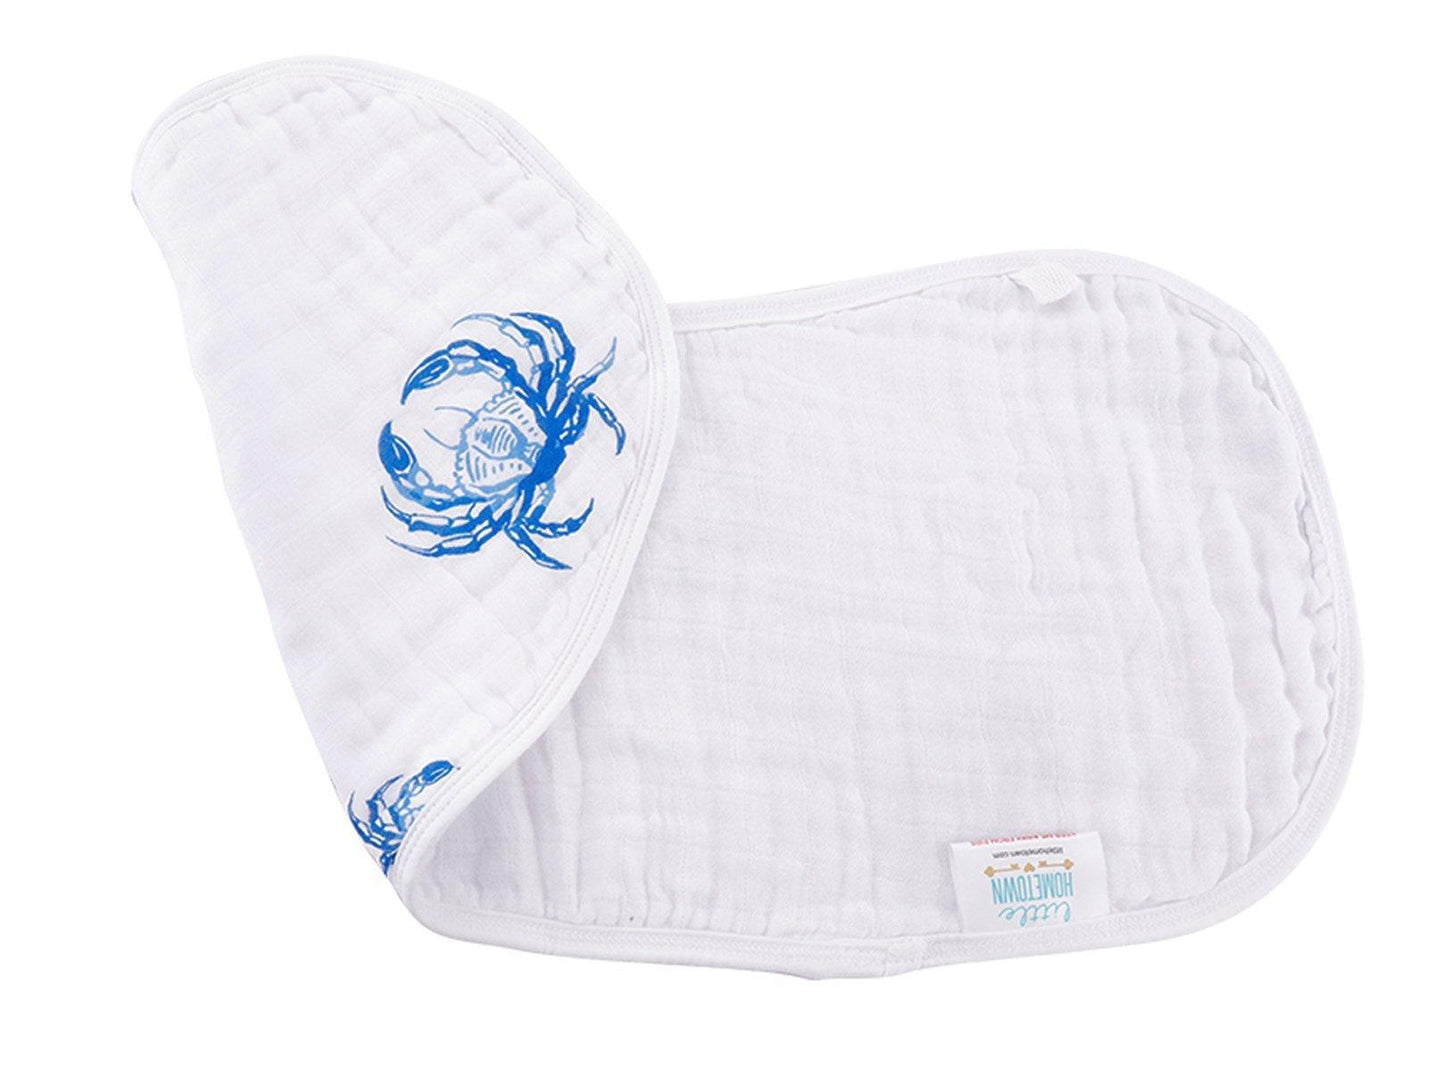 Blue crab-themed baby bib and burp cloth set with playful crab illustrations on a white background.